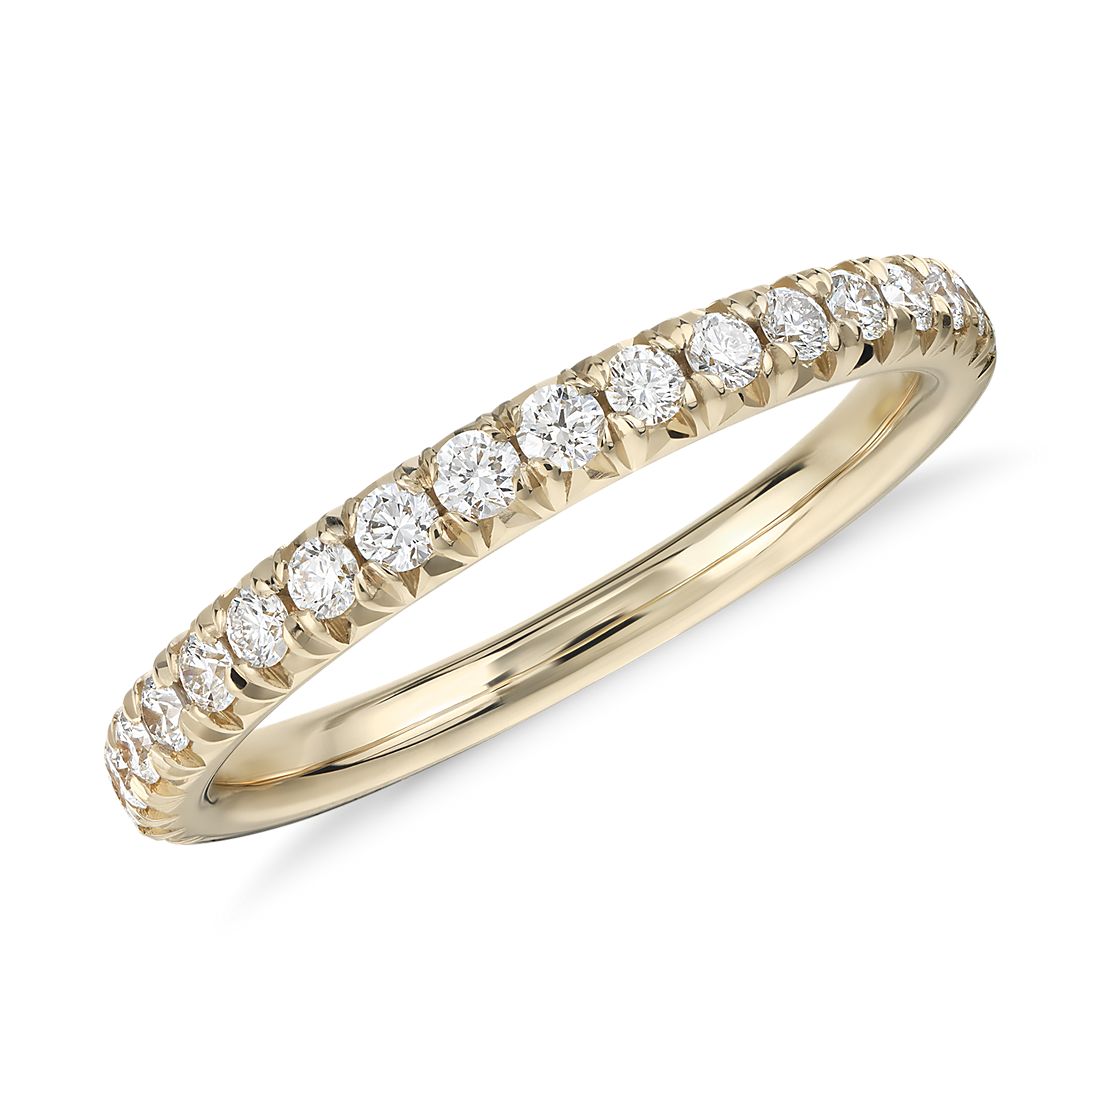 French Pavé Diamond Ring in 14k Yellow Gold (1/4 ct. tw.)